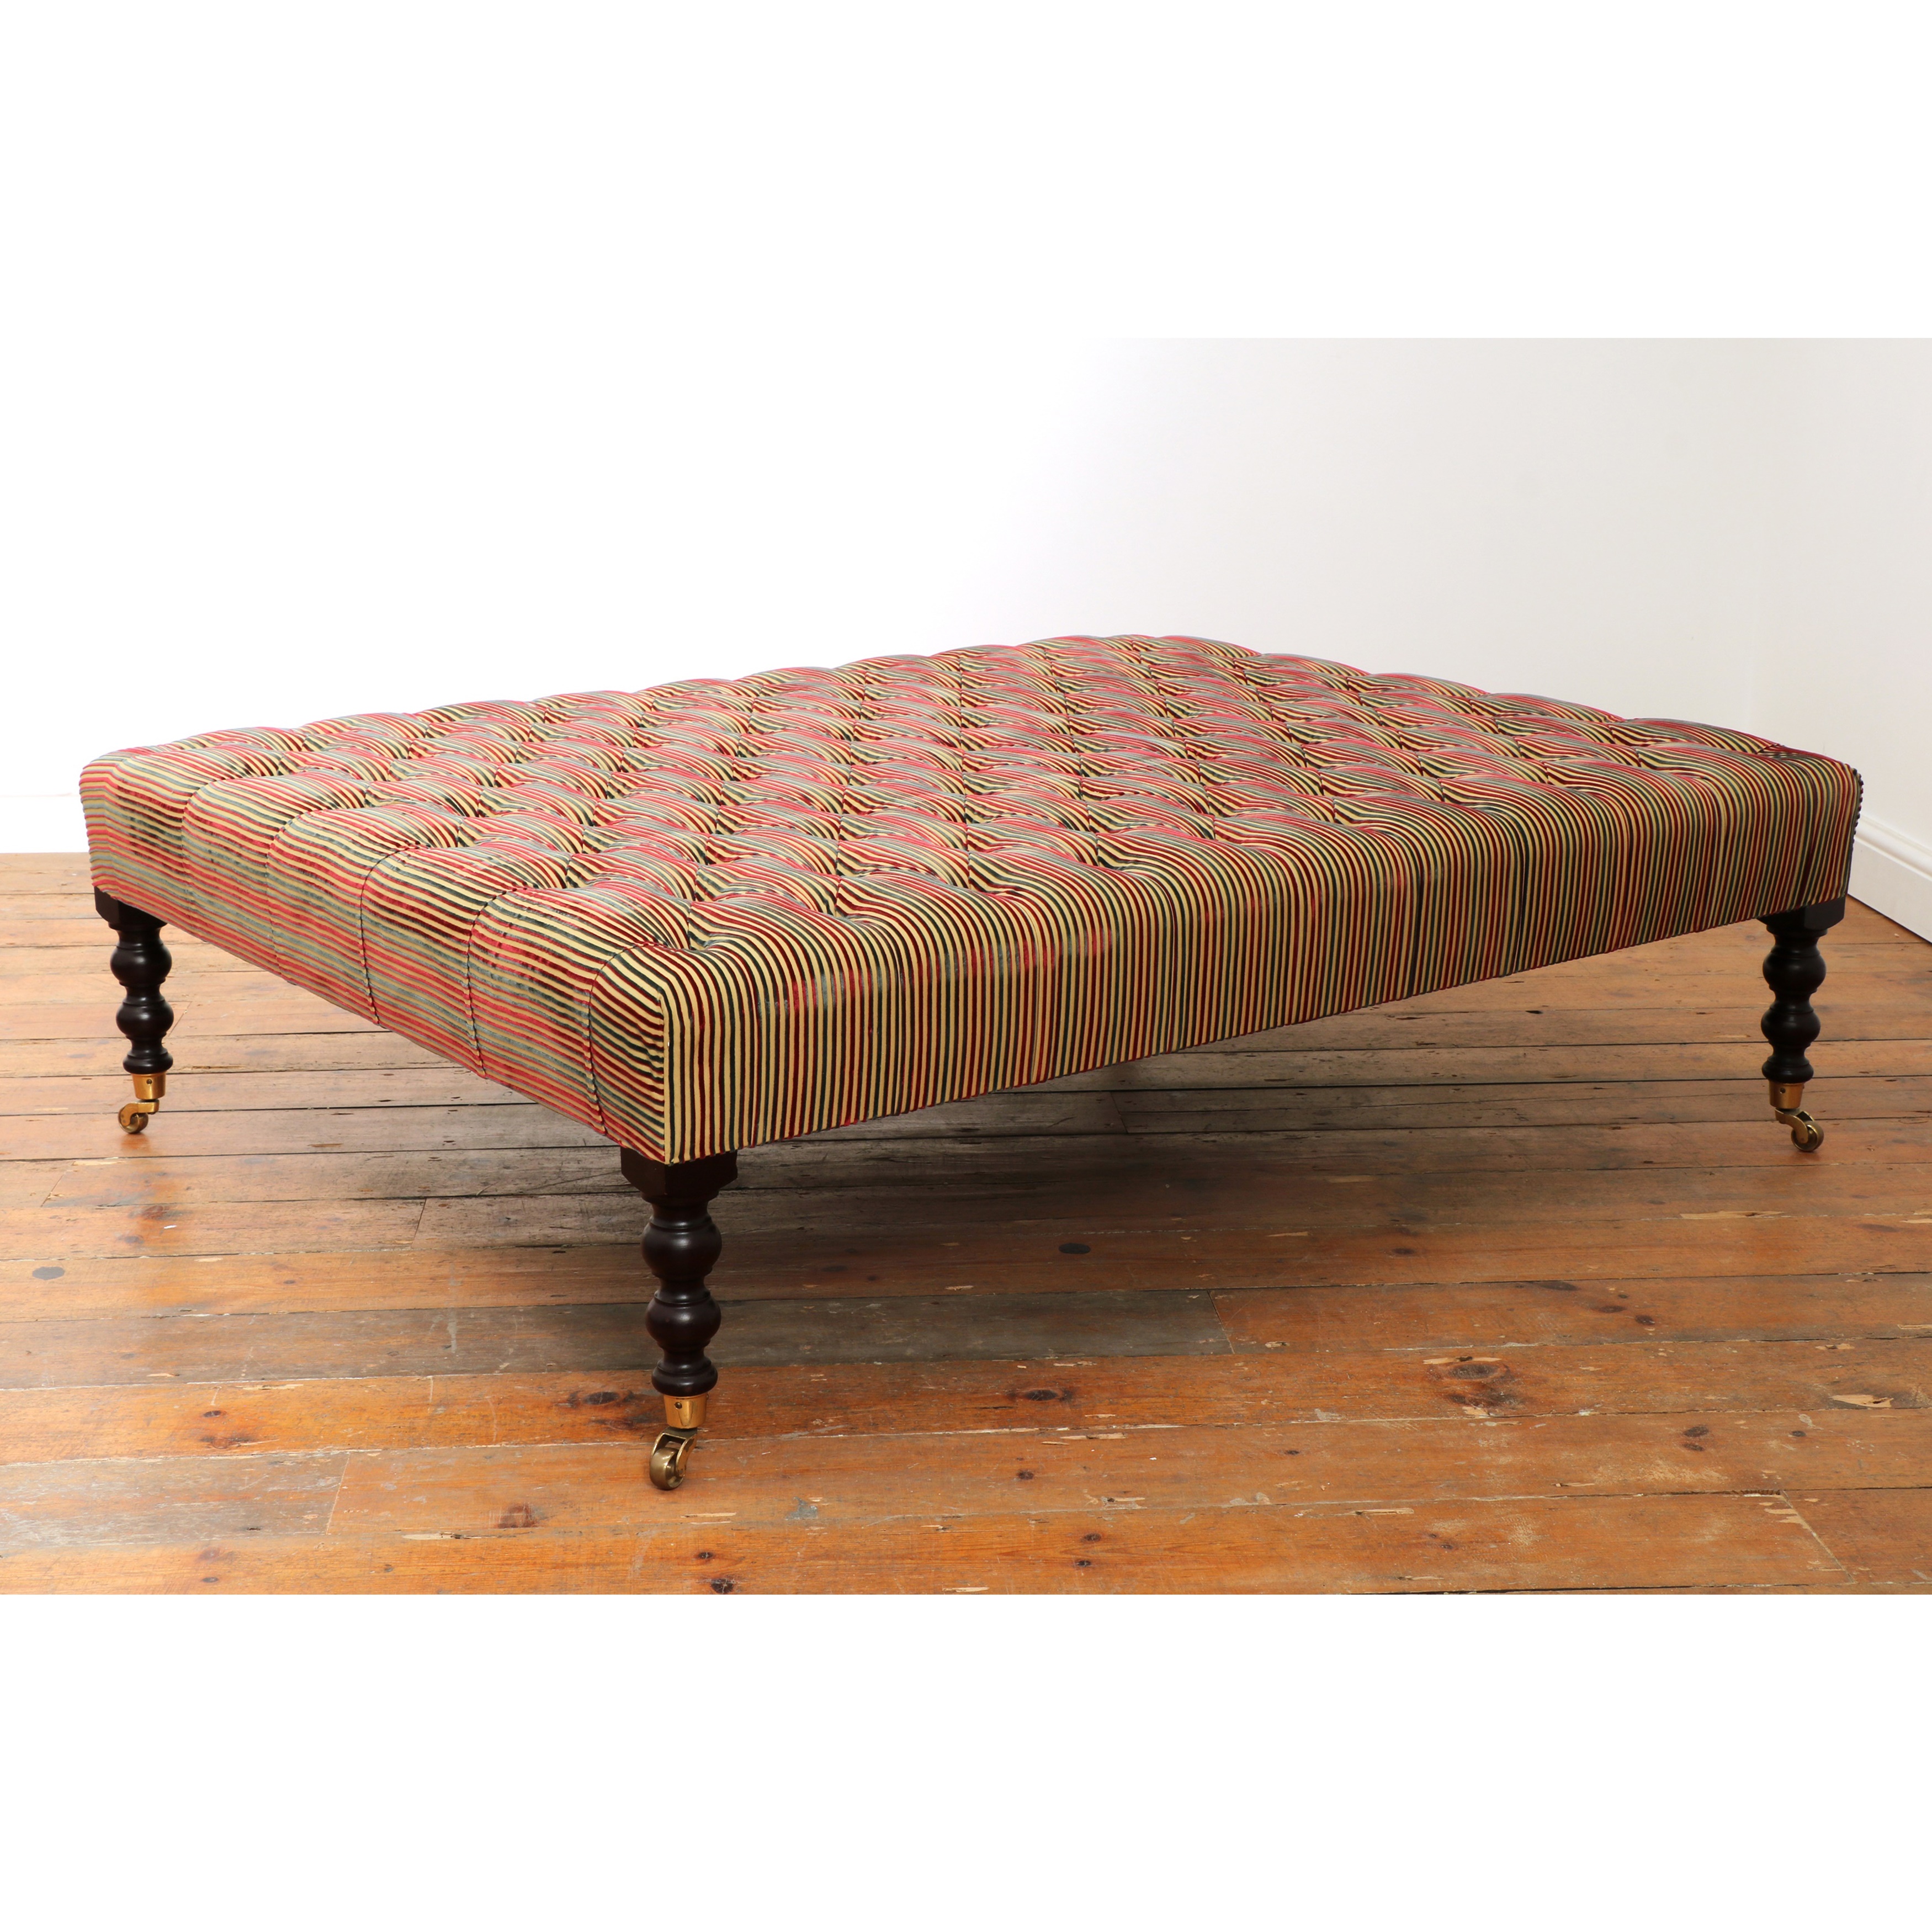 A large rectangular footstool by George Smith of Newcastle 